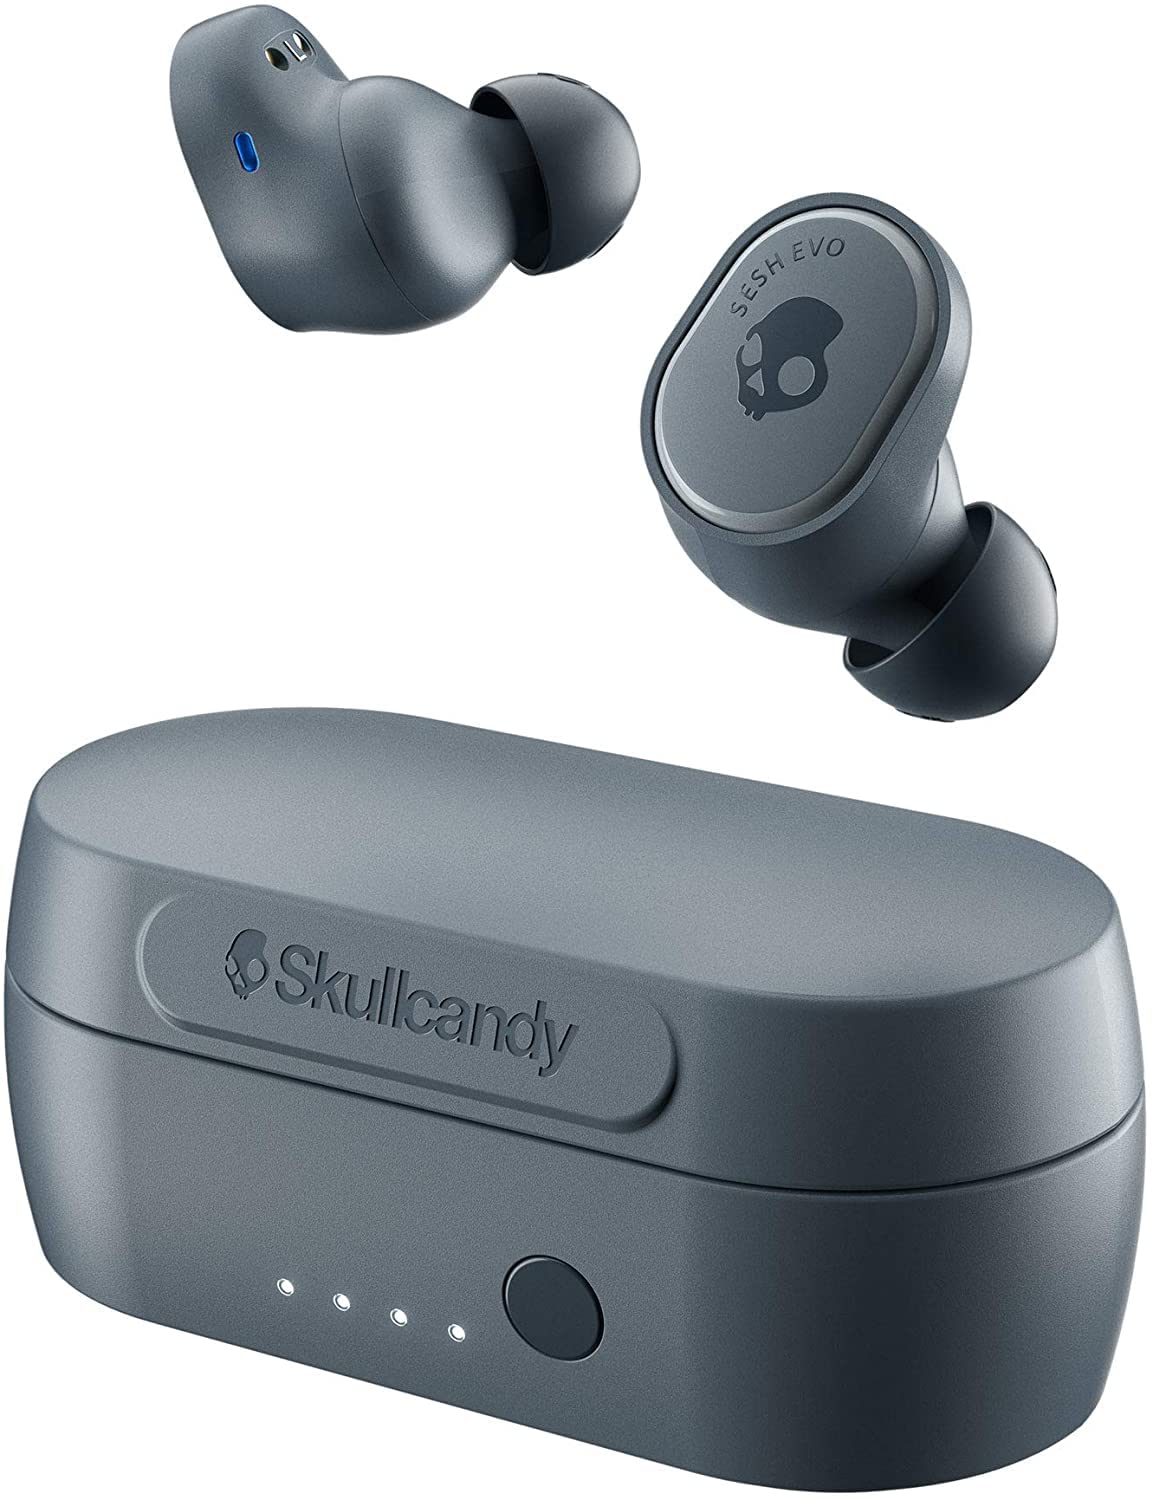 Skullcandy Sesh Evo In-Ear Wireless Earbuds, 24 Hr Battery, Microphone, Works with iPhone Android and Bluetooth Devices - Chill Grey